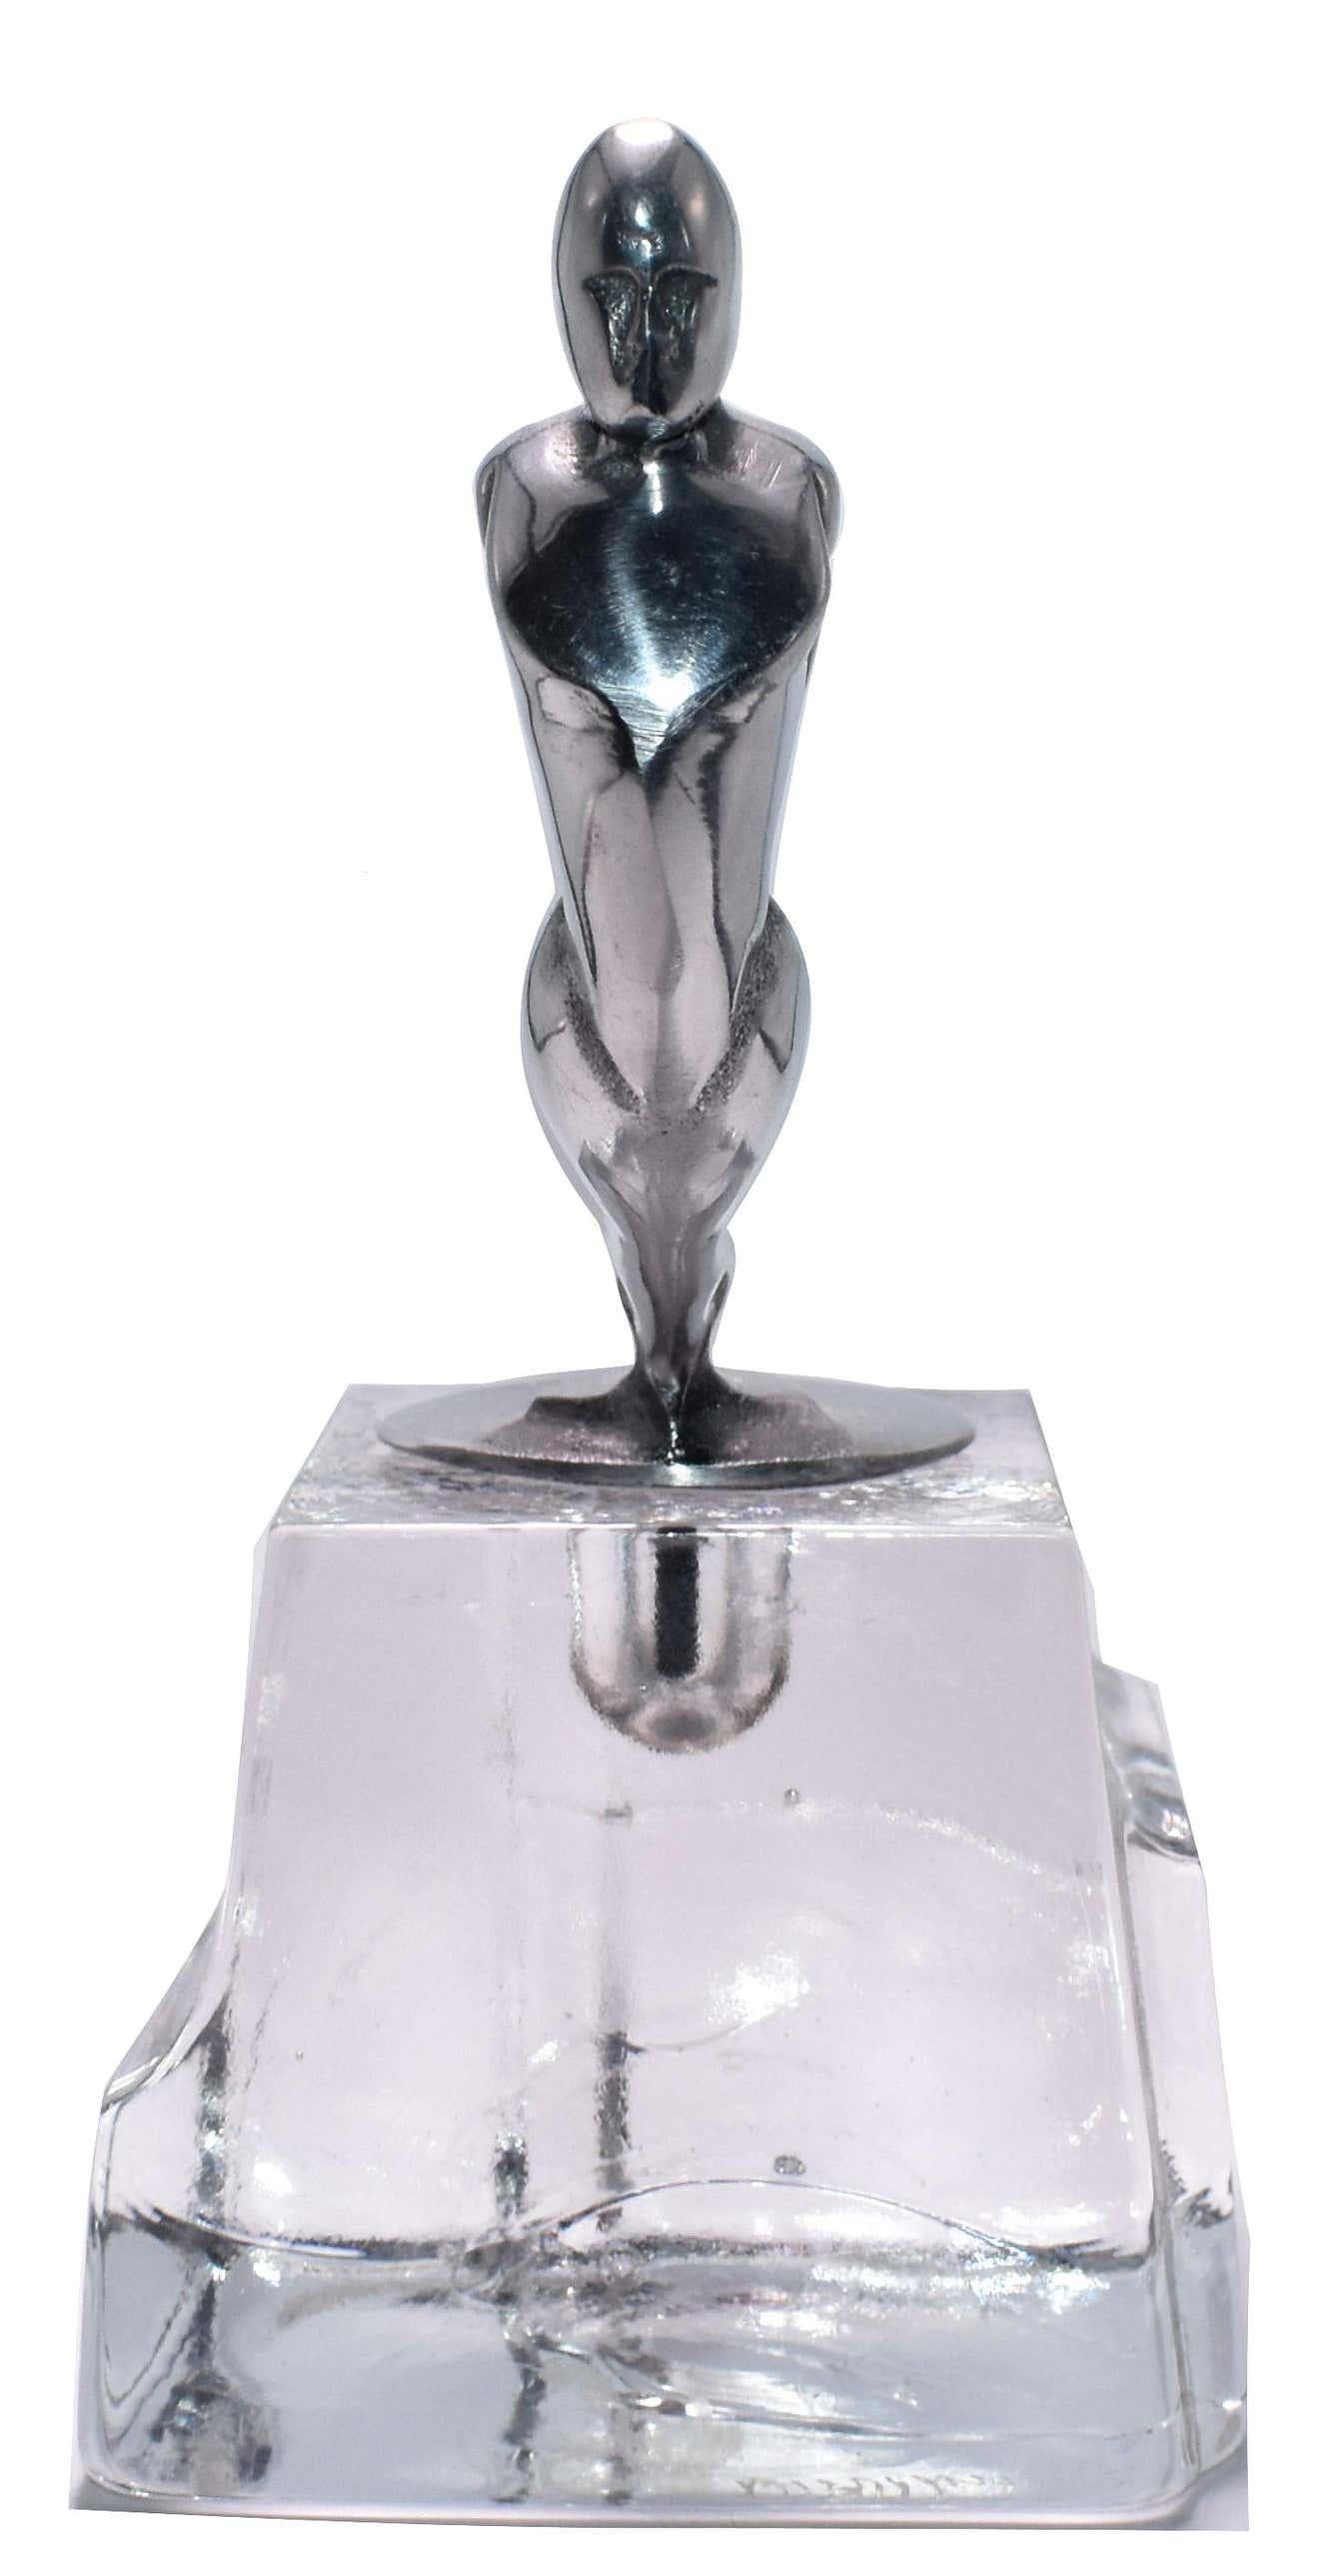 Stunning Art Deco chrome car mascot mounted on a solid block of Swedish art glass. The mascot is original to the 1930's, the base of course is a later addition and makes for a perfect paper weight or just an ornament to appreciate. This is a very